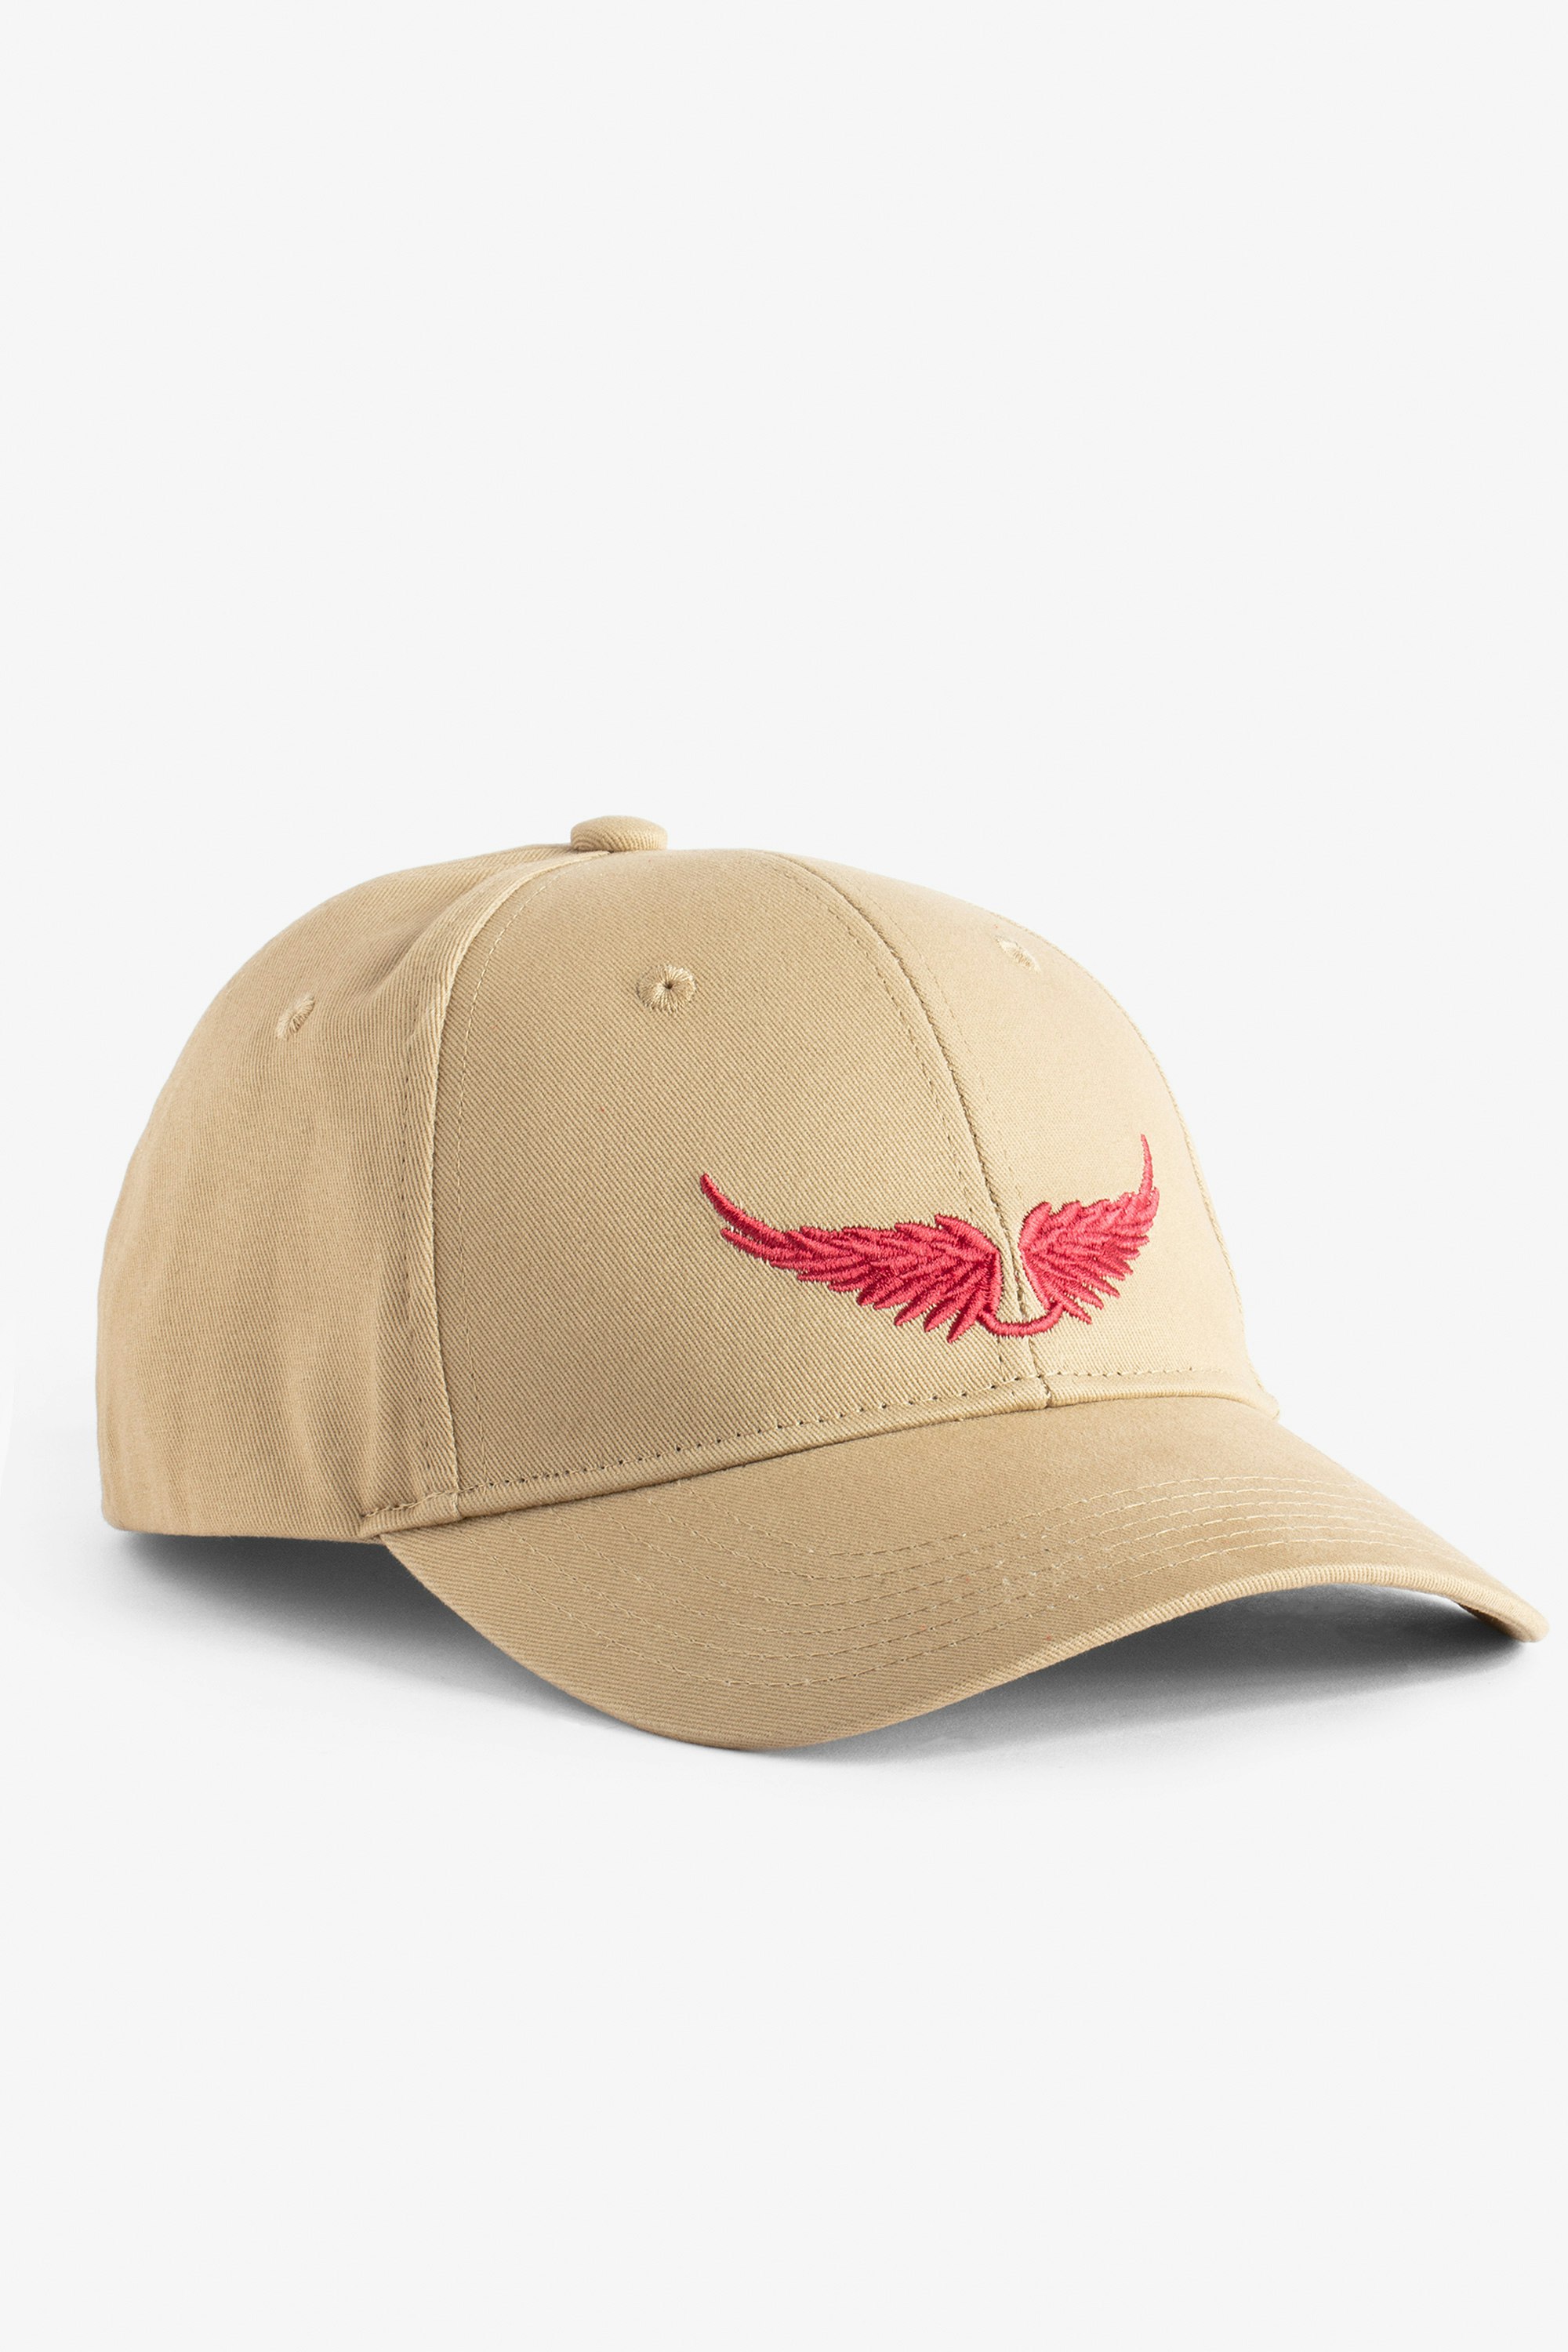 Head Over Heels Baseball Cap - Women’s brown cotton baseball cap with embroidered wings.